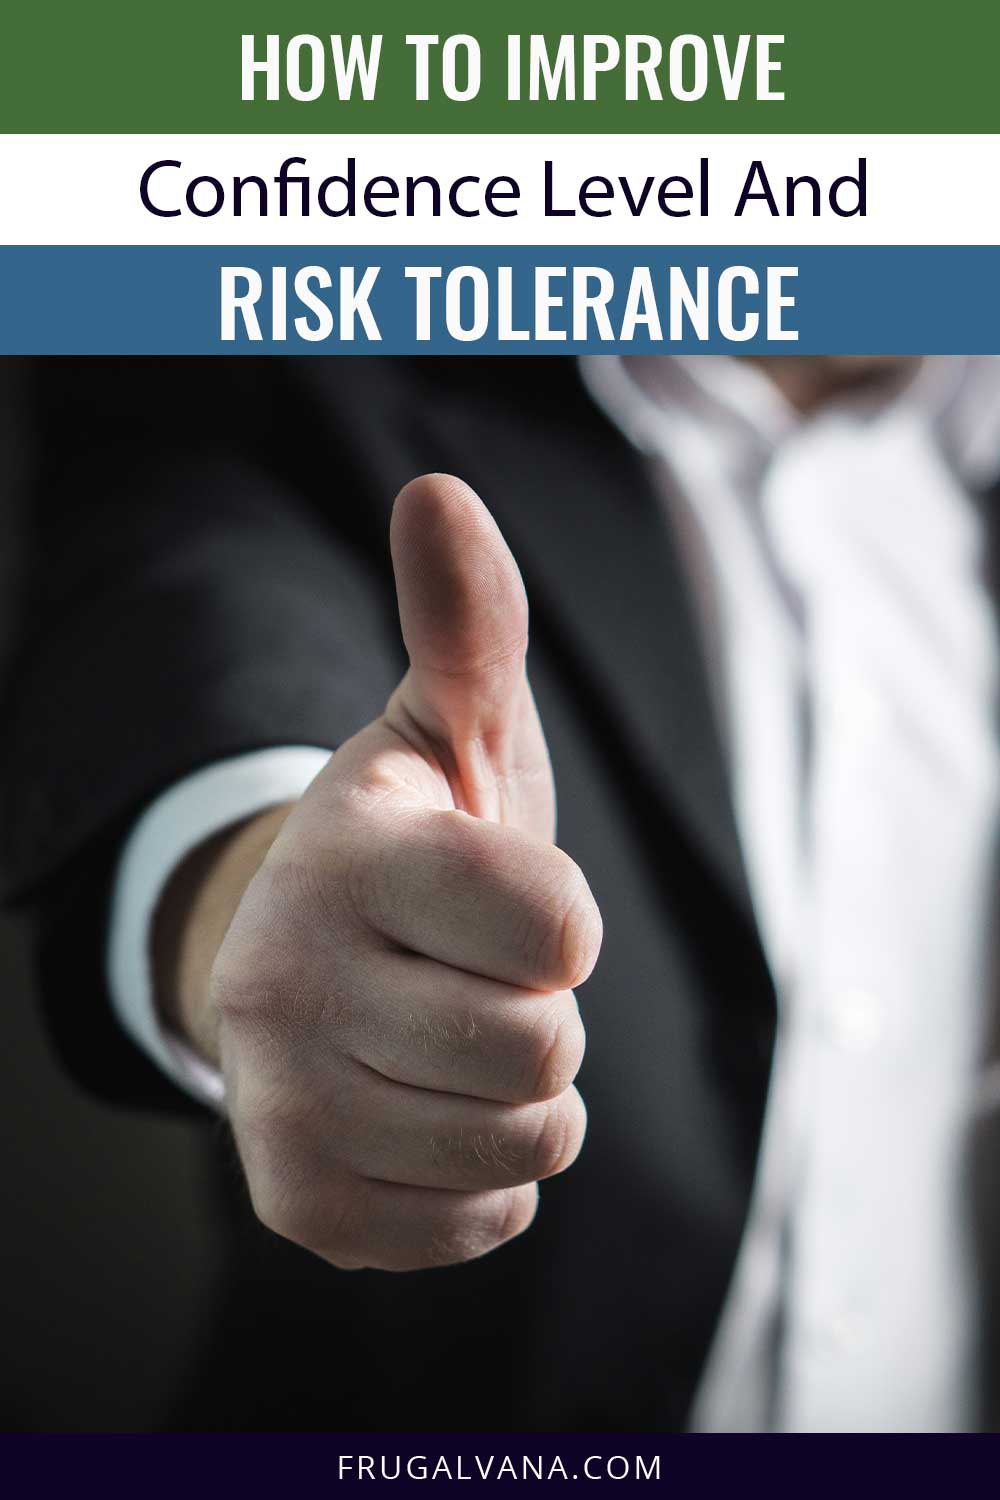 How To Improve Confidence Level And Risk Tolerance